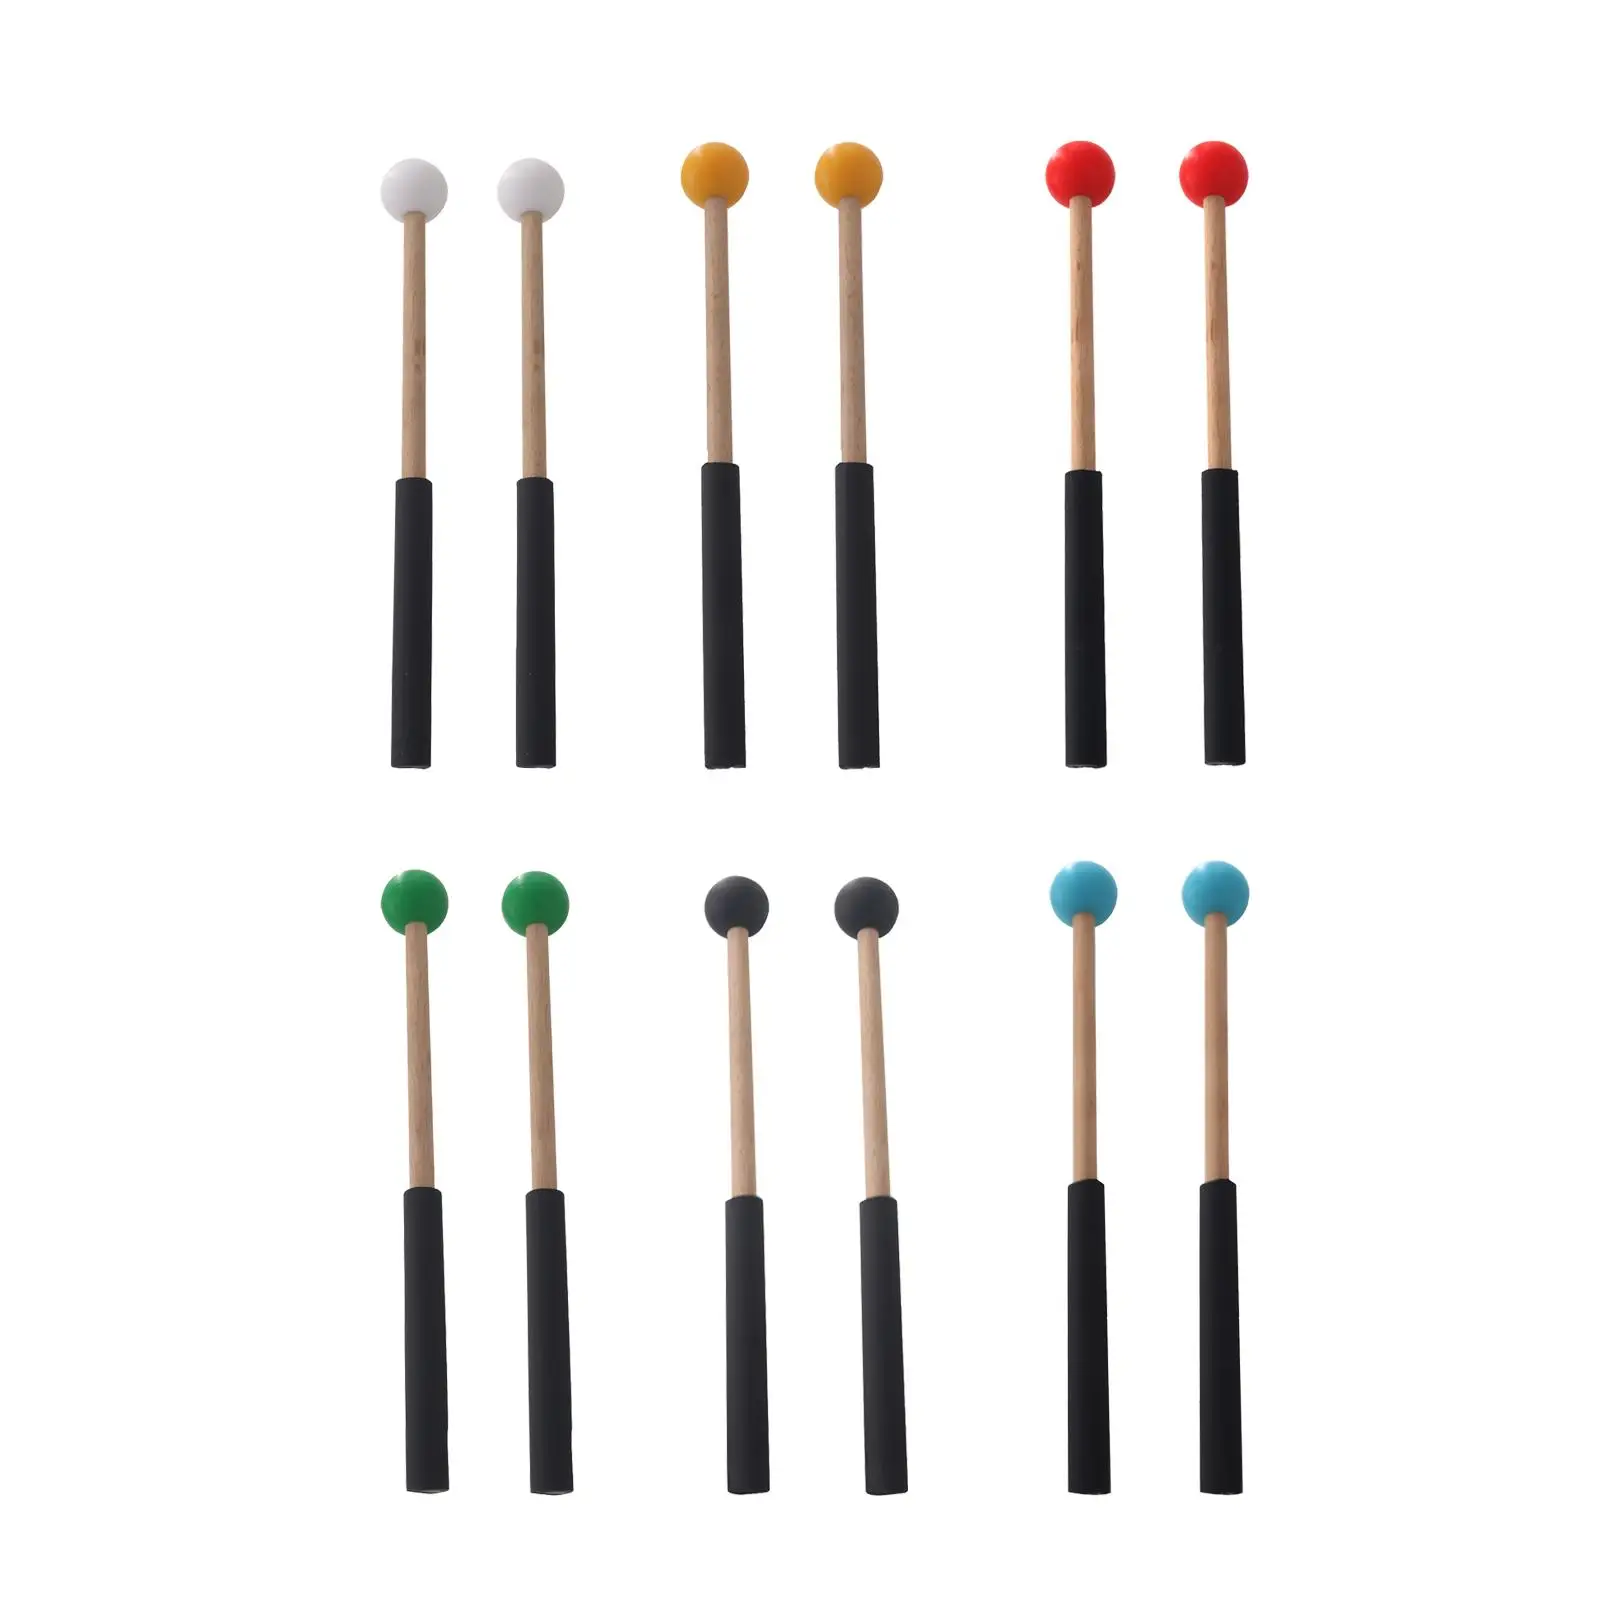 2 Pieces 8.6inch Rubber Mallet Percussion Musical Drumstick Percussion Drumsticks for Music Education Marimba Yoga Exercise